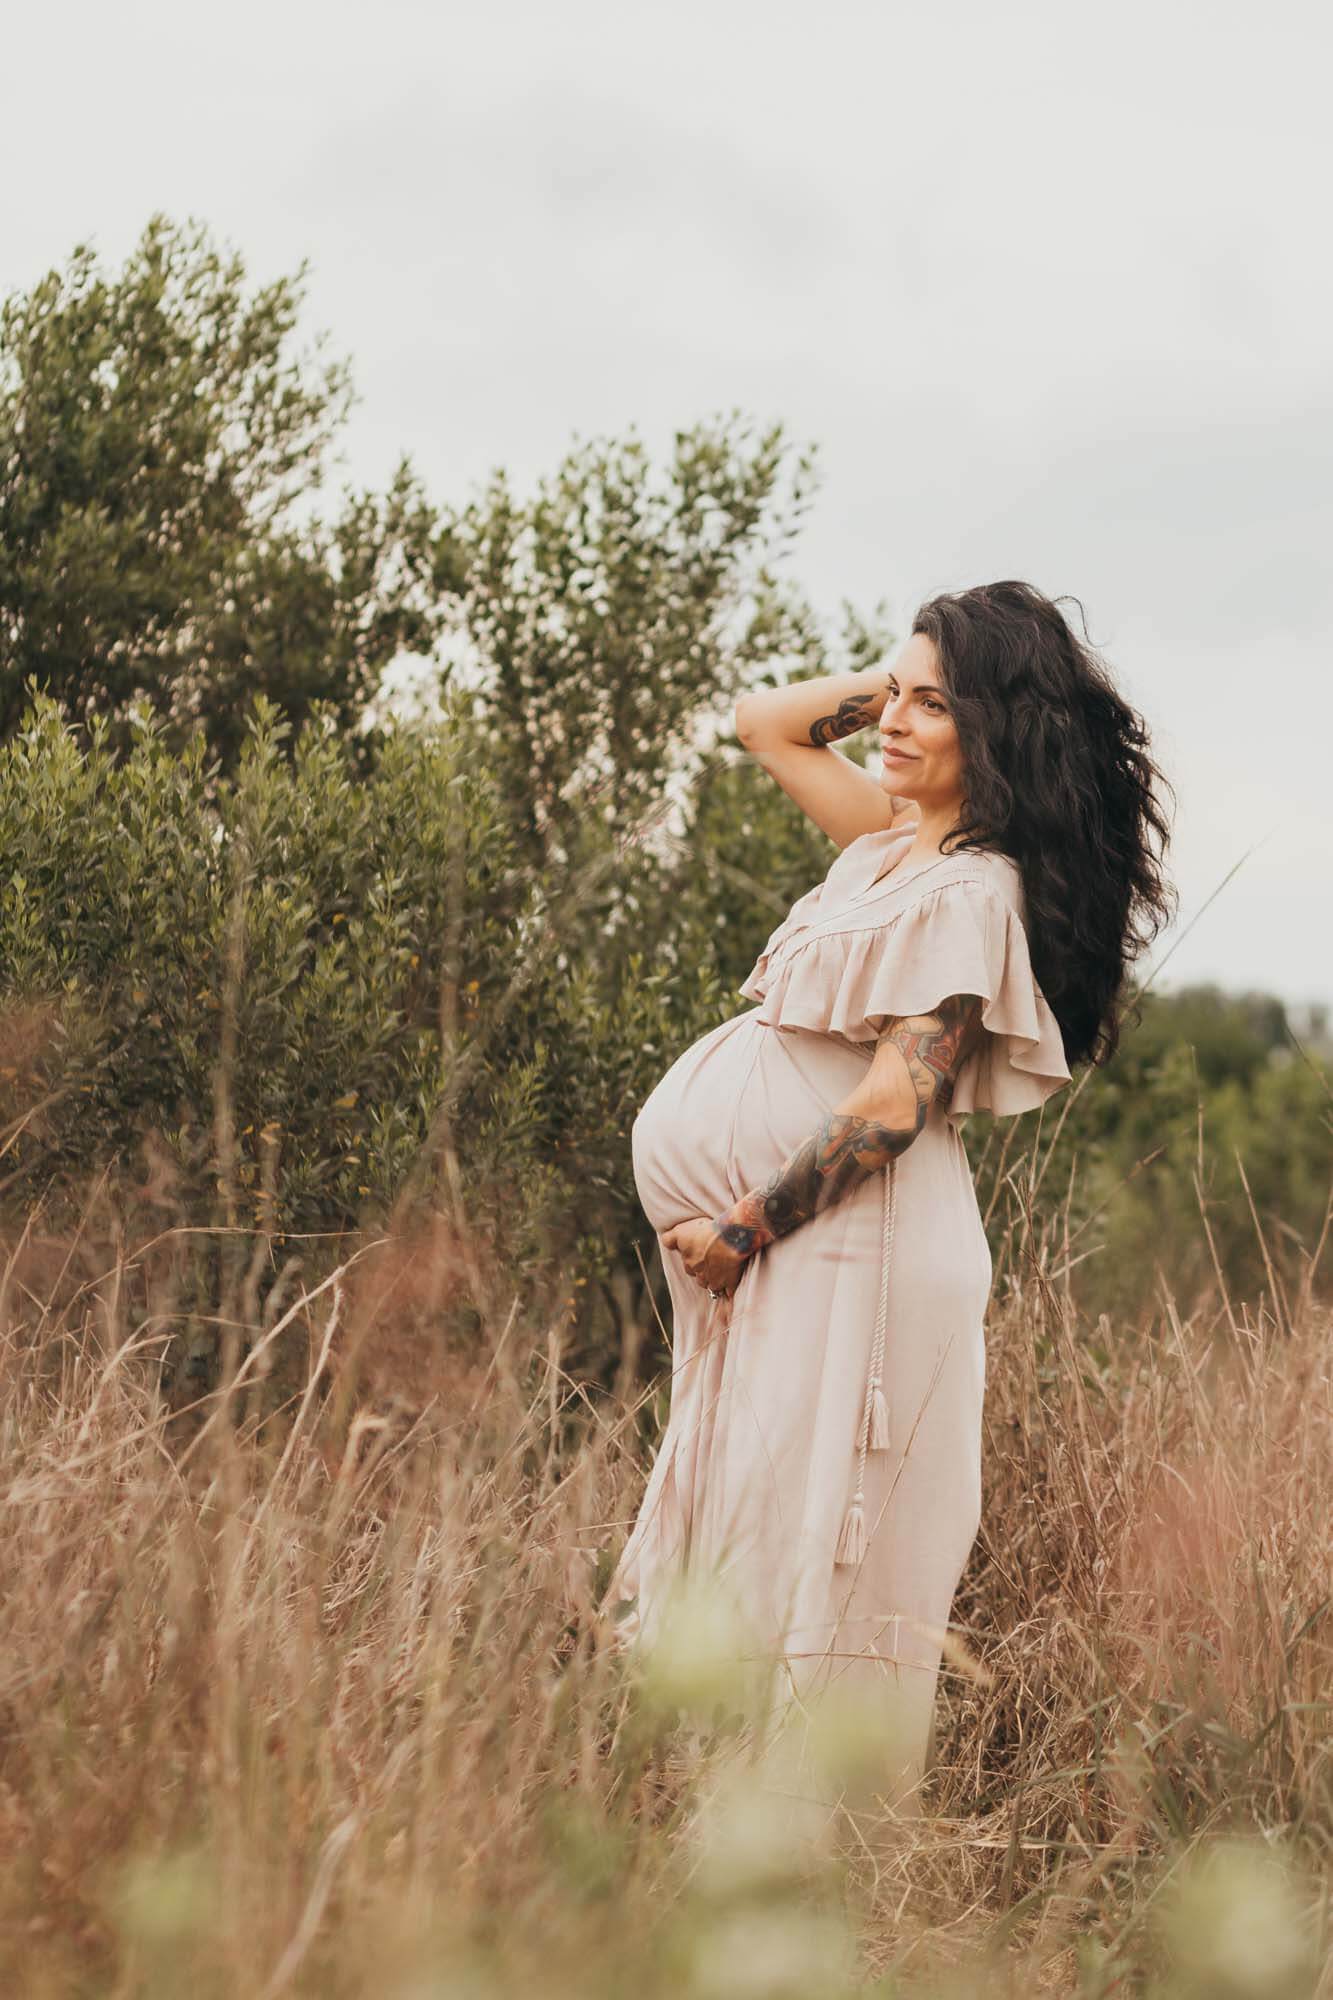 expectant mom caresses her belly while running her hands through her hair.